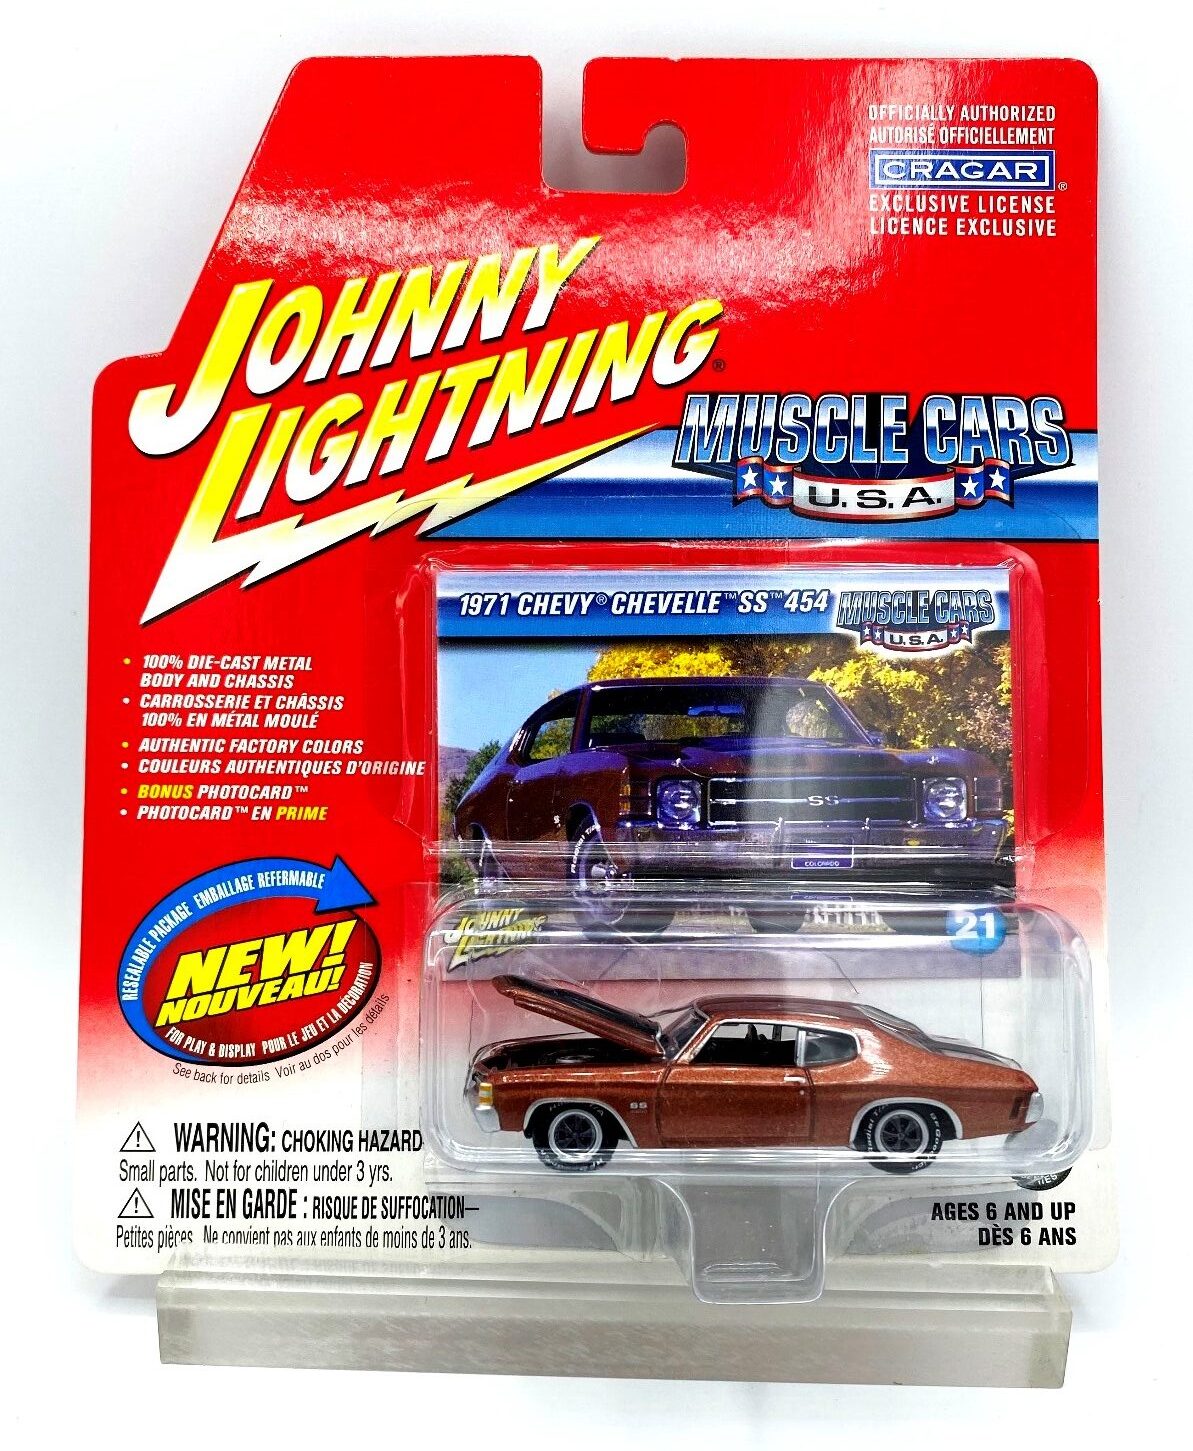 1995 JOHNNY LIGHTNING MUSCLE CARS USA Series 4 1970 CHEVELLE SS 